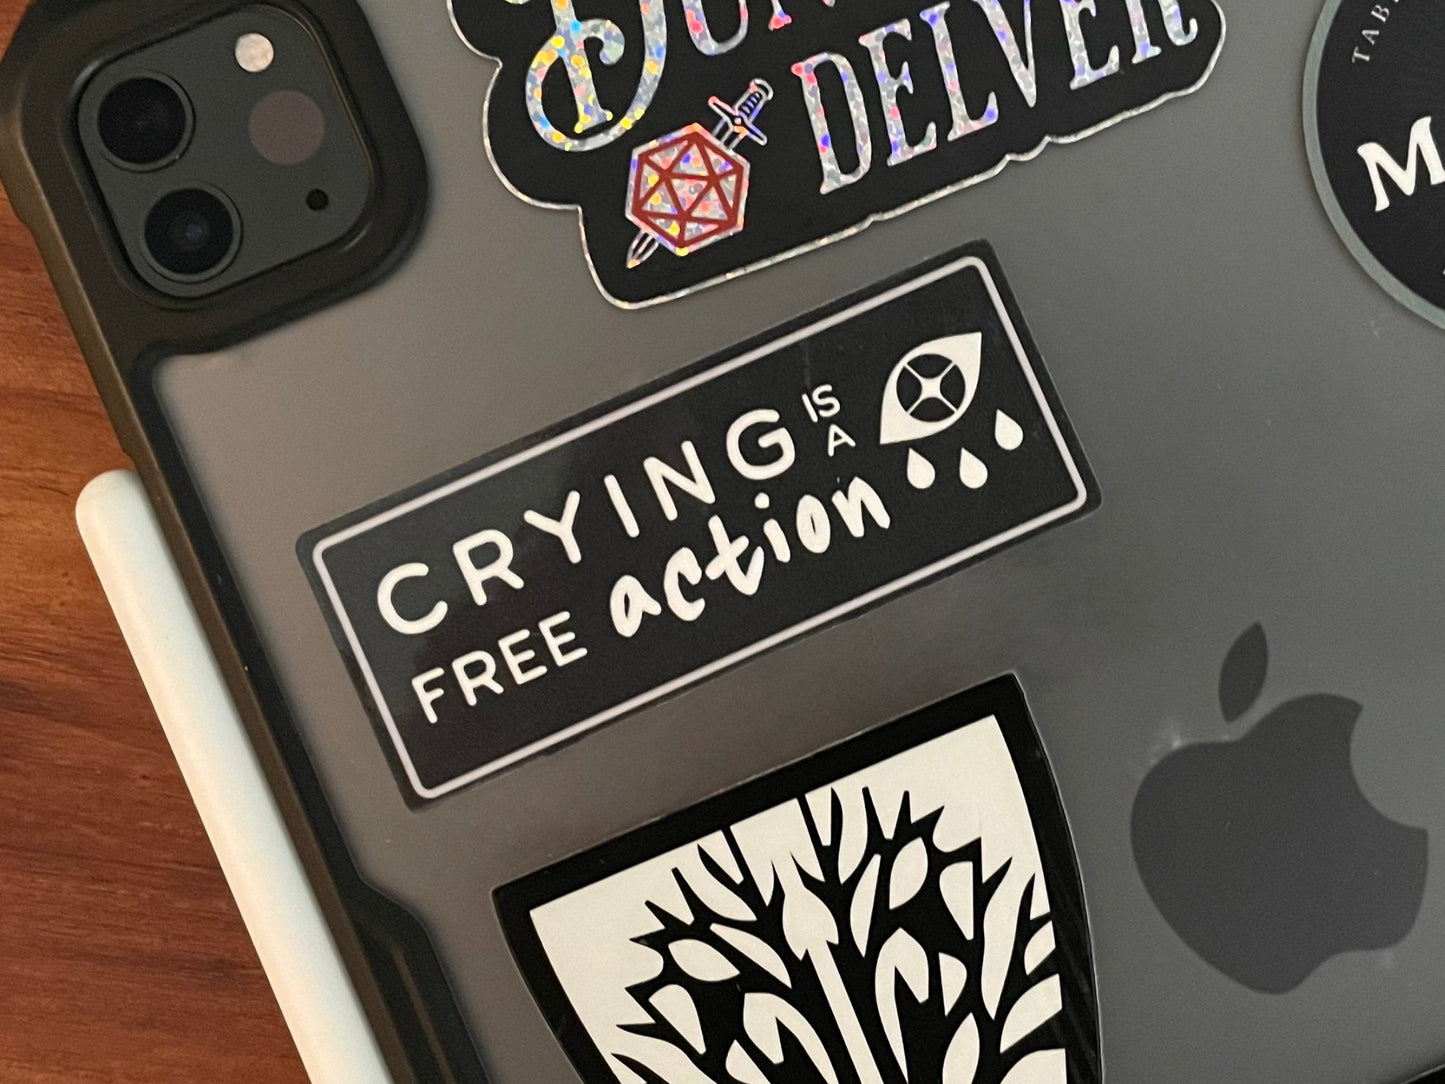 Crying is a Free Action Sticker